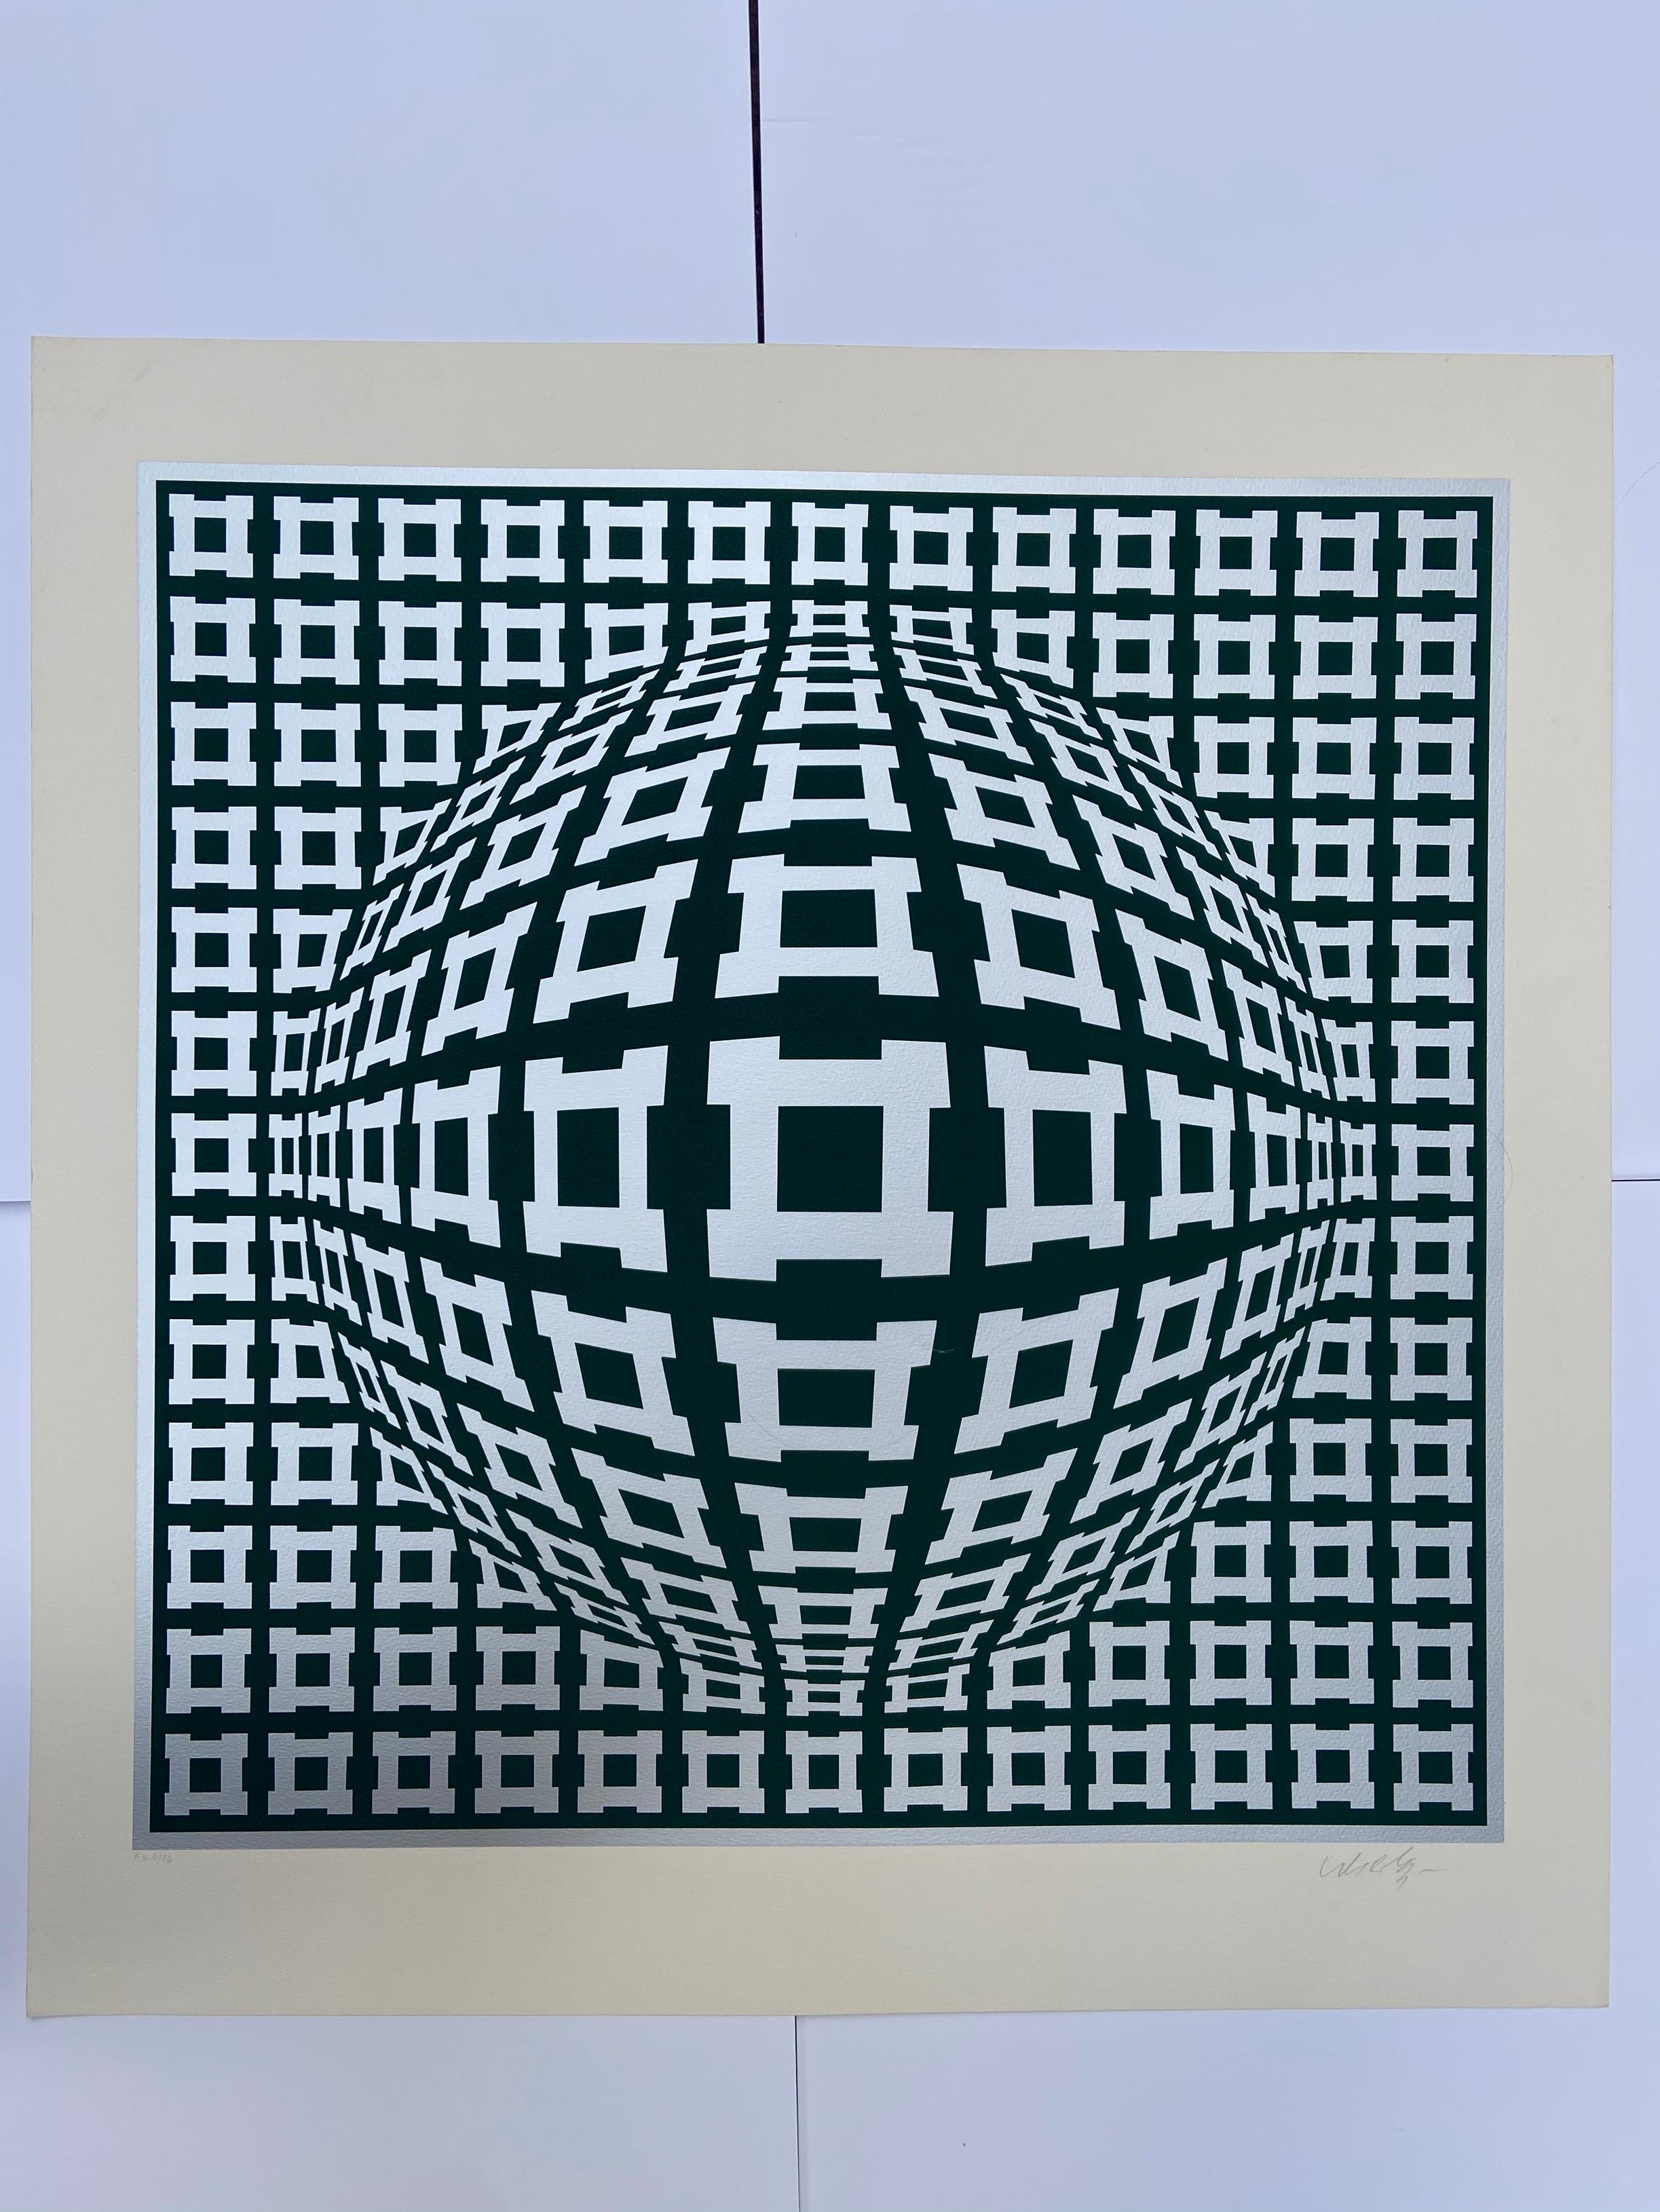 Victor Vasarely Abstract Print - Vasarely - Kinetics 9 - 1965